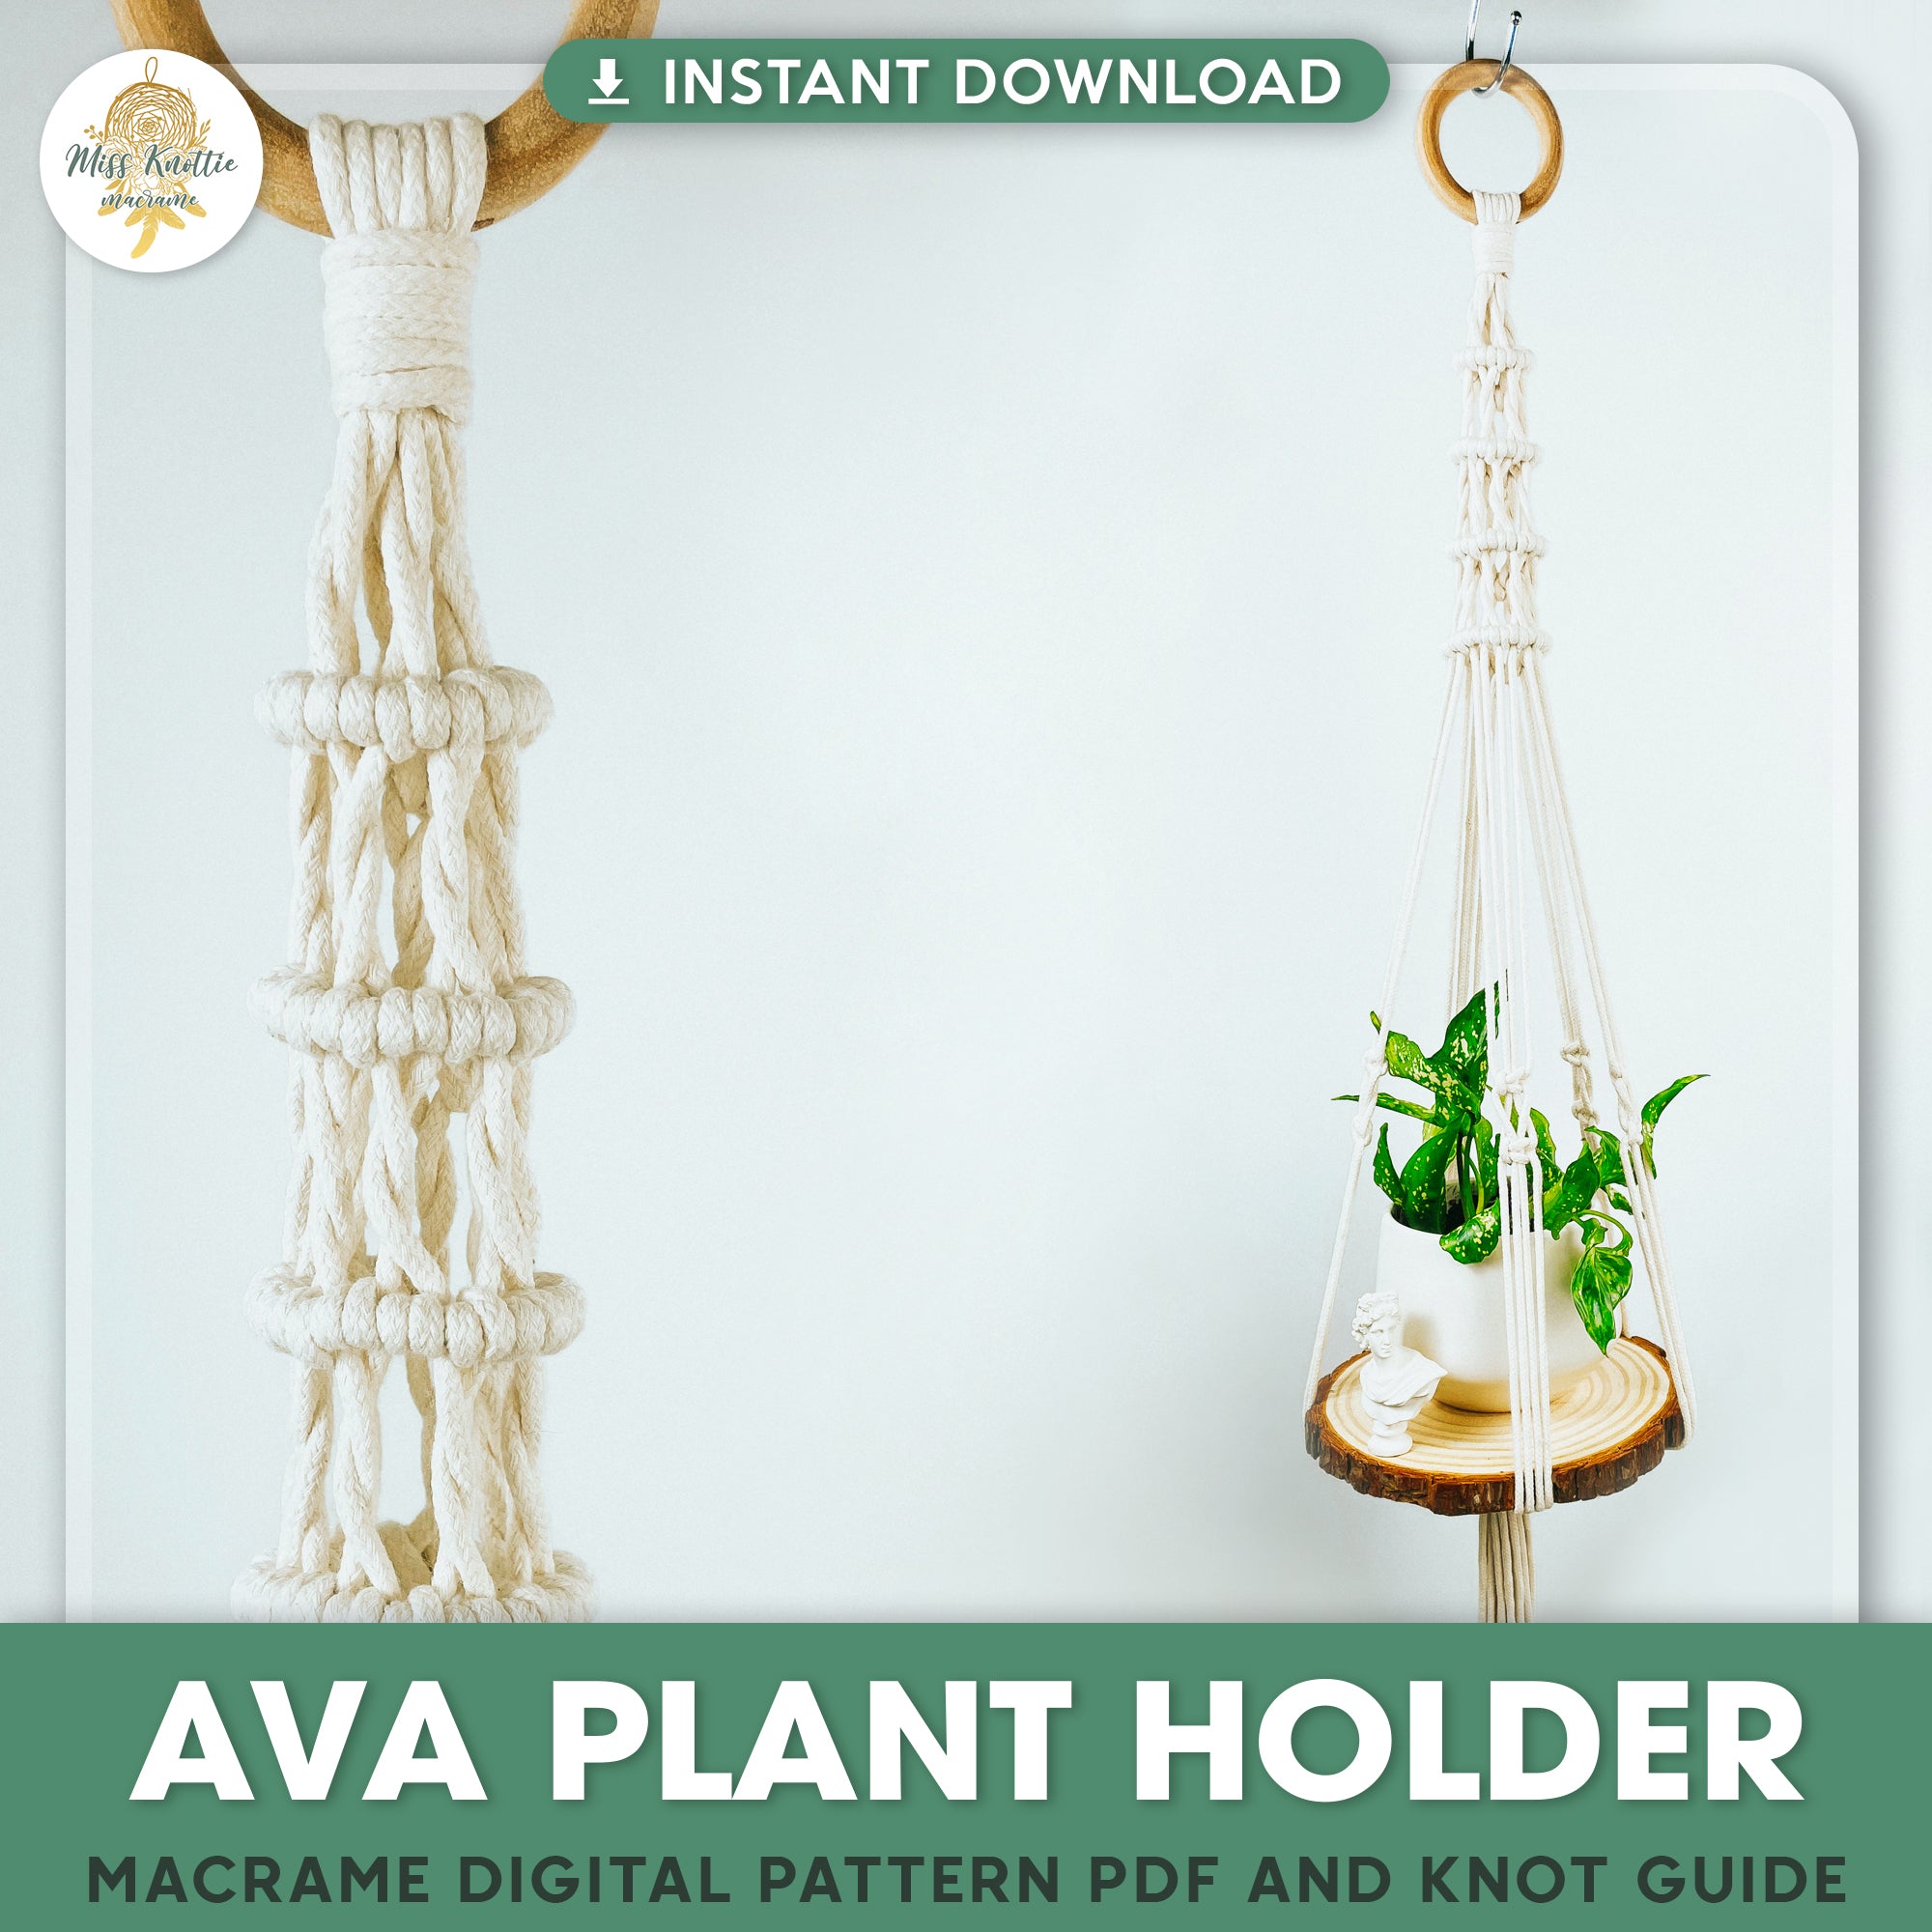 Ava Plant Holder - Digital PDF and Knot Guide